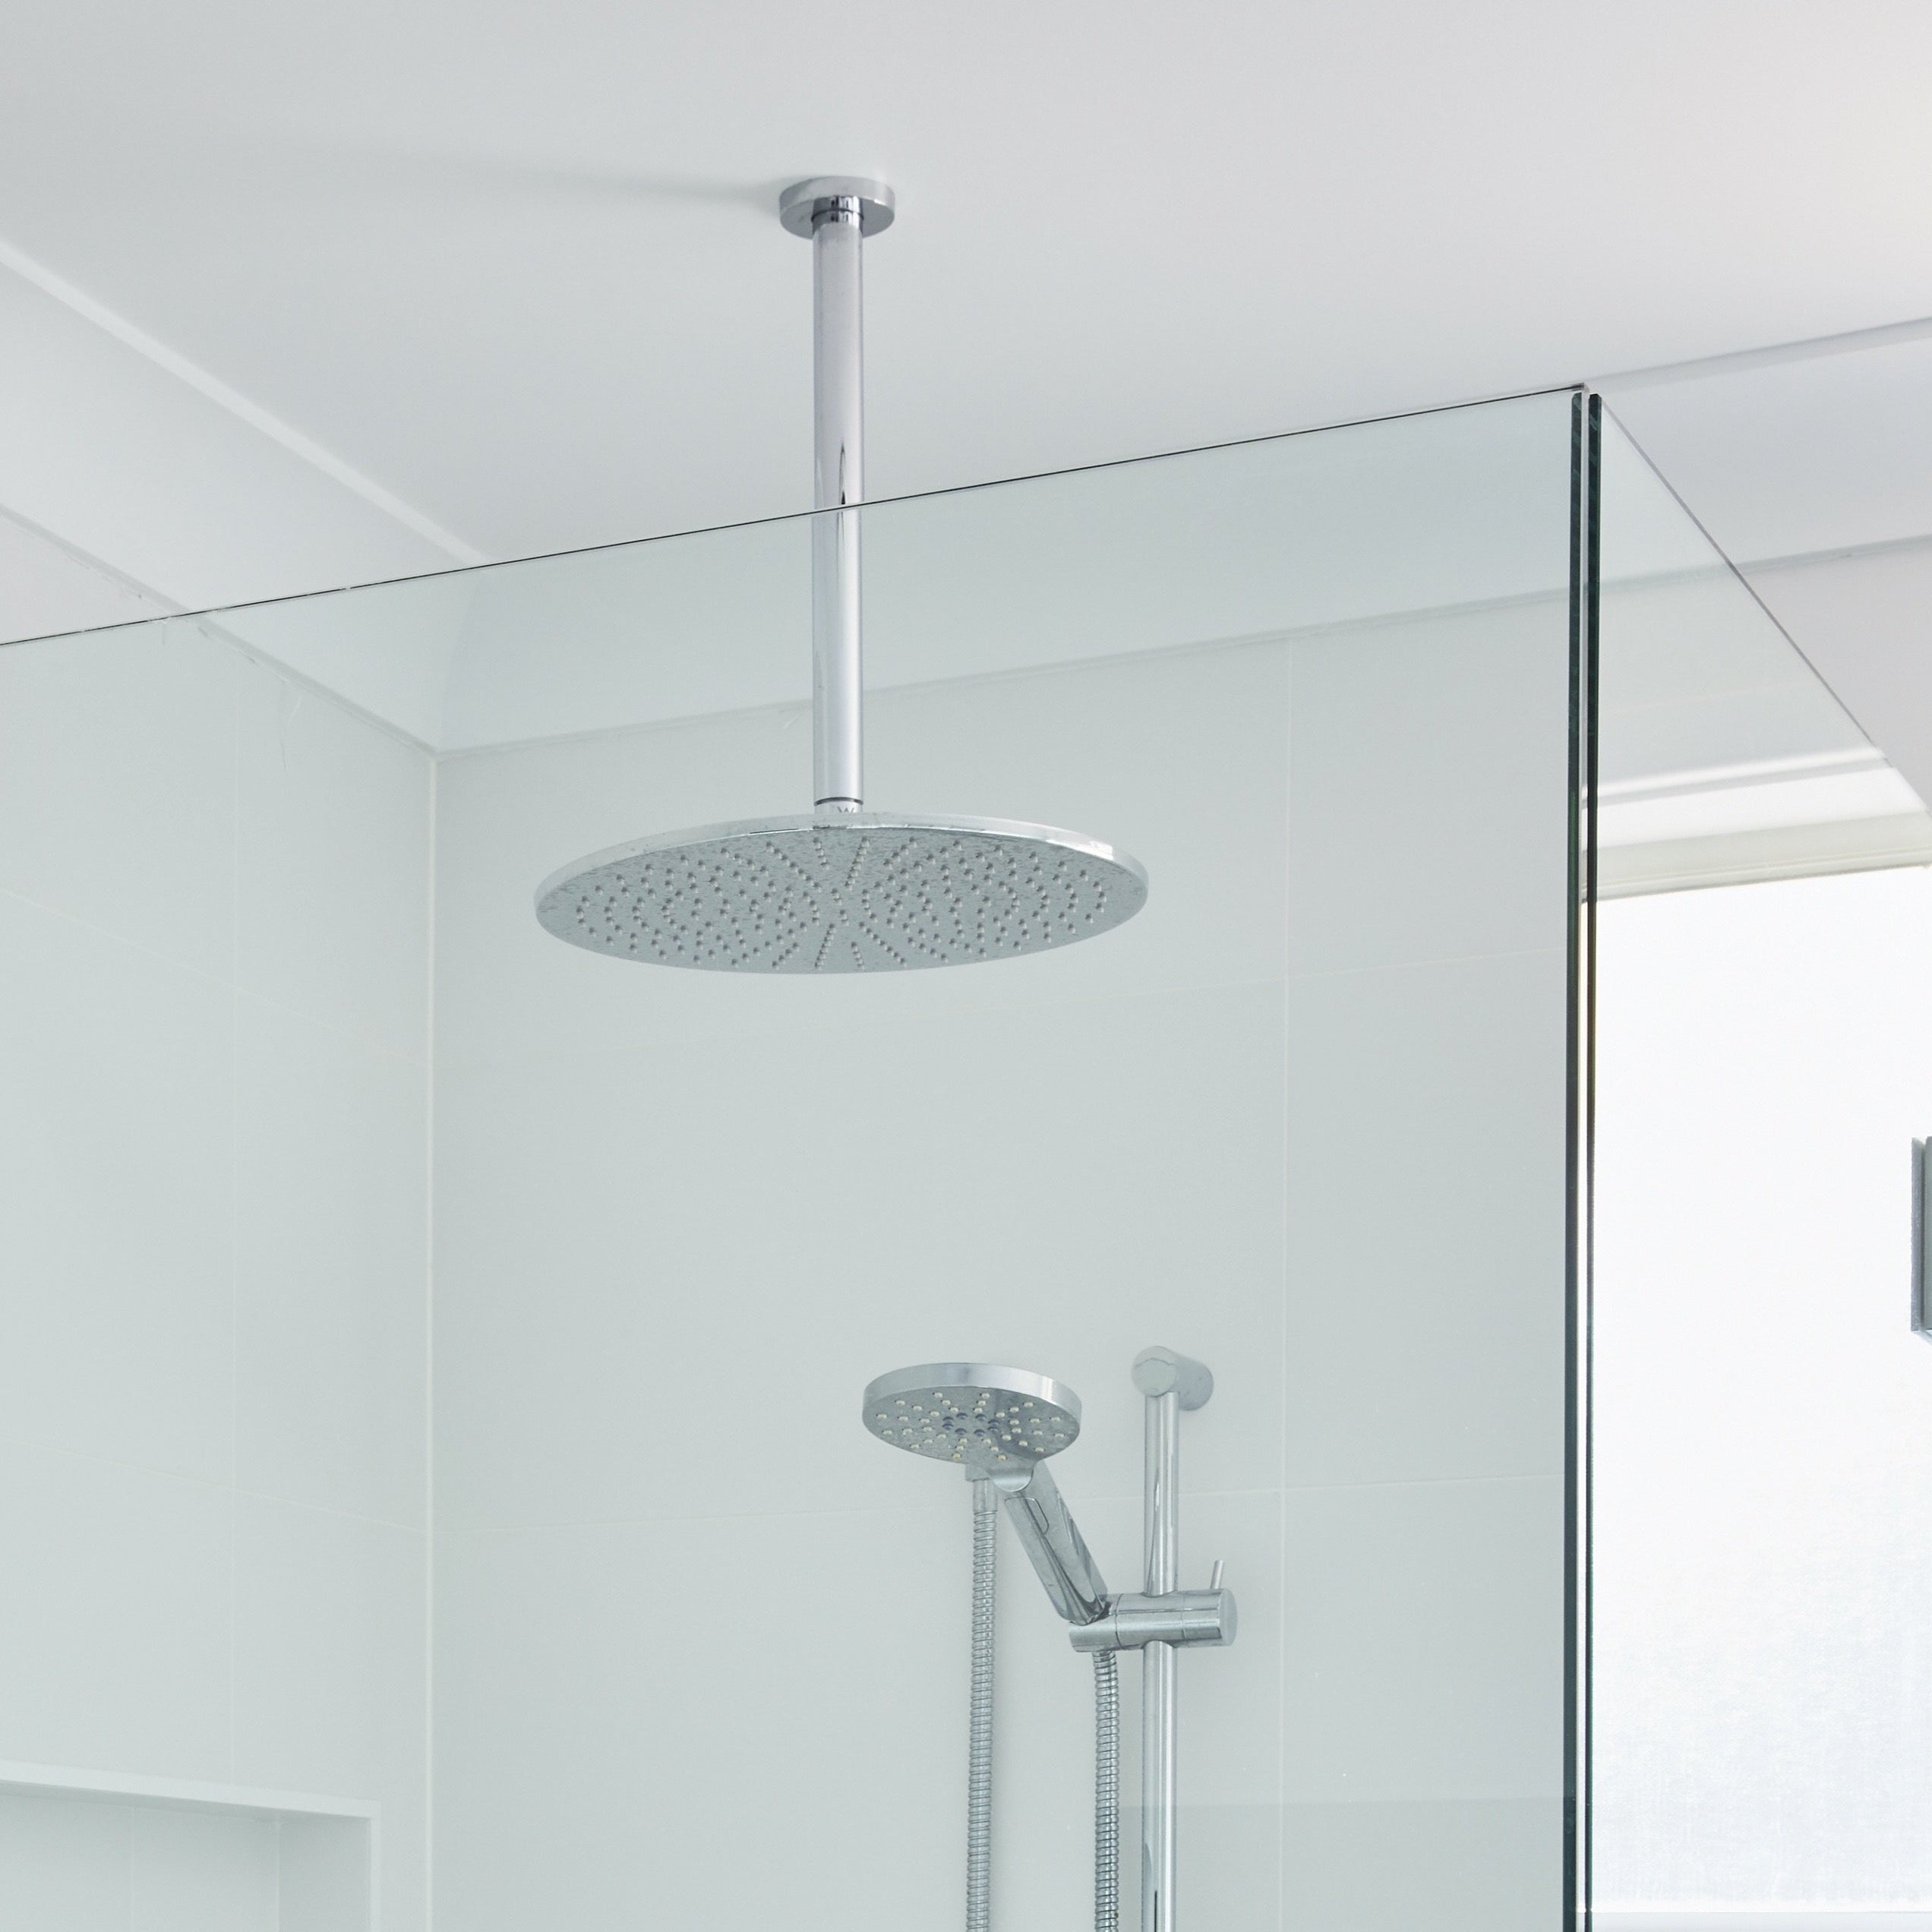 Daintree Ceiling Mounted Shower Arm Round in Chrome